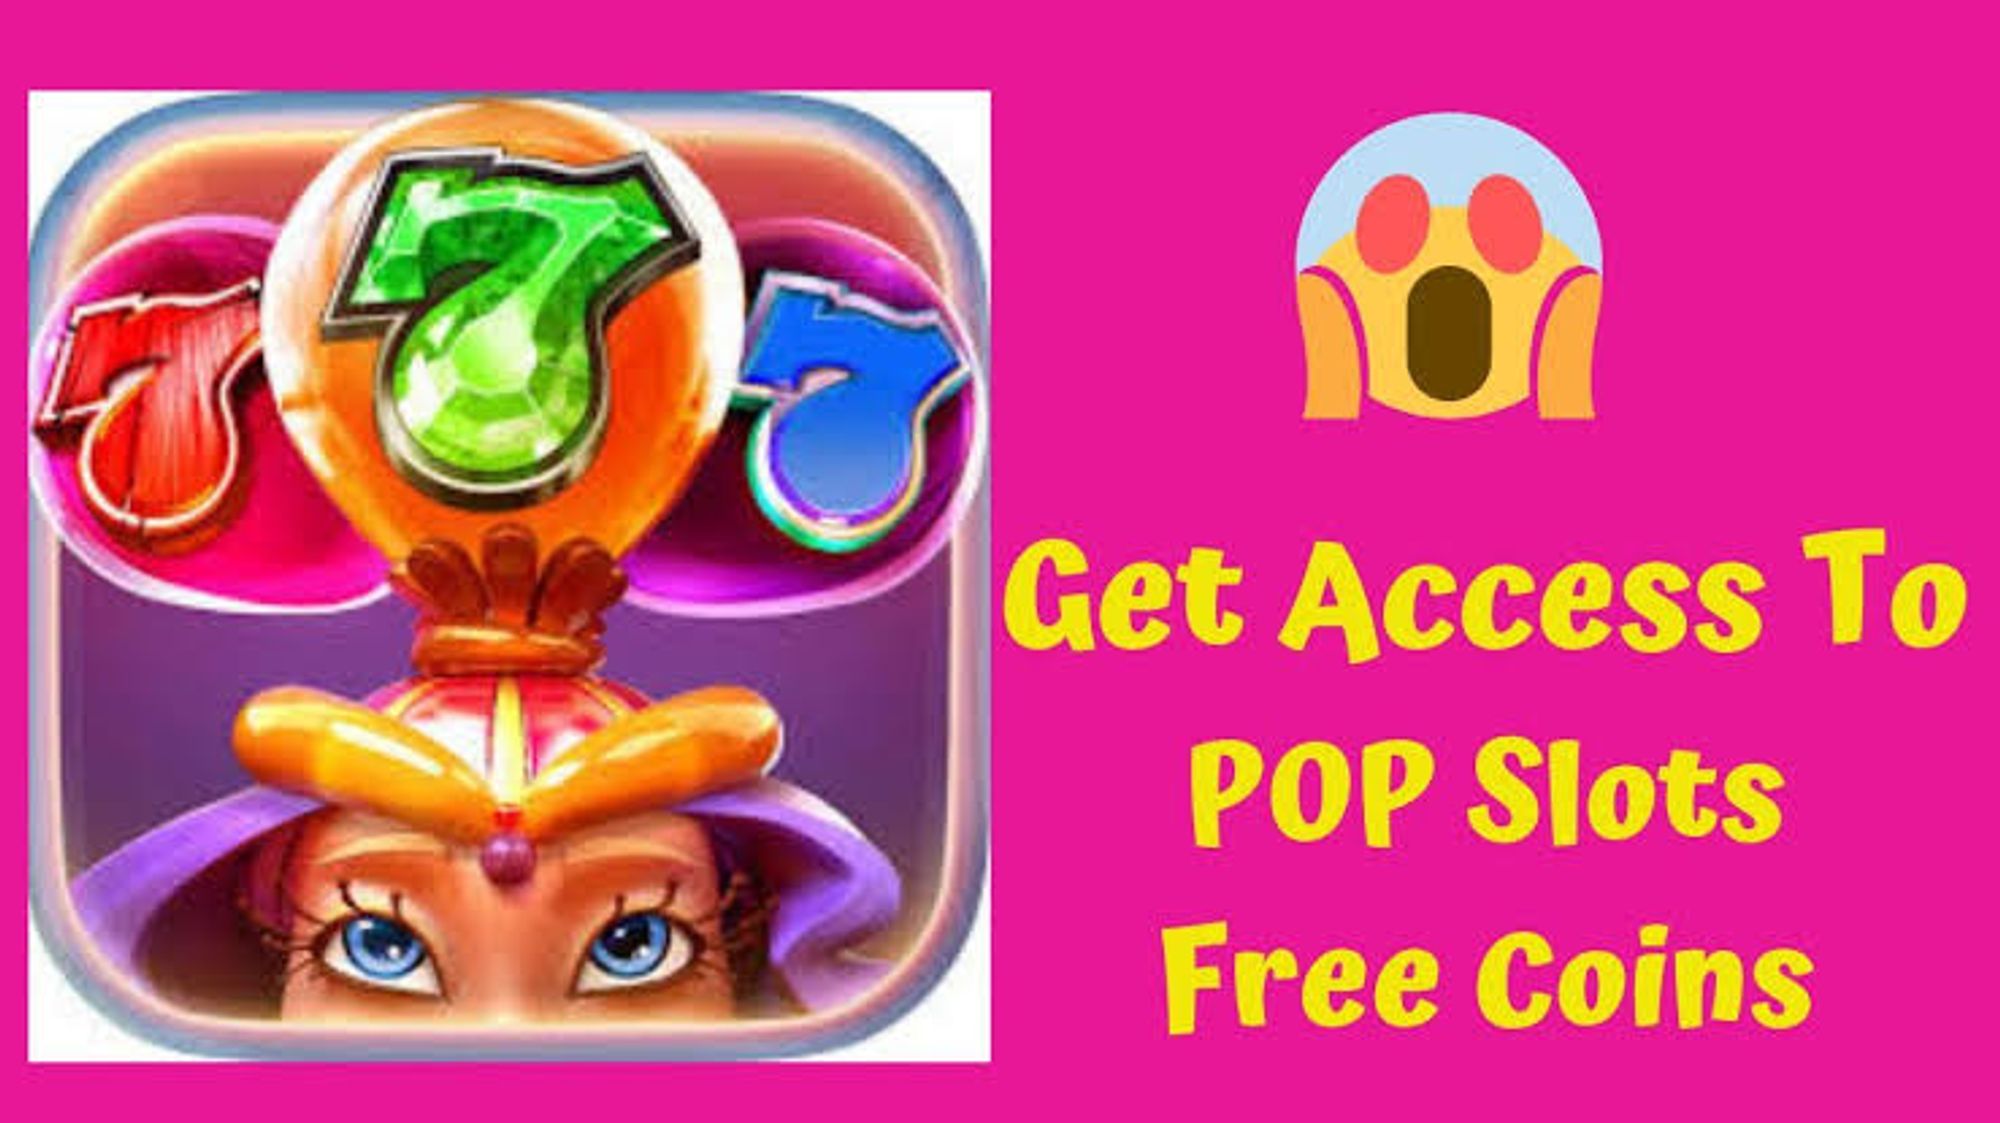 Download Free Casino Slot Games For Mobile - Casino With Paypal Slot Machine